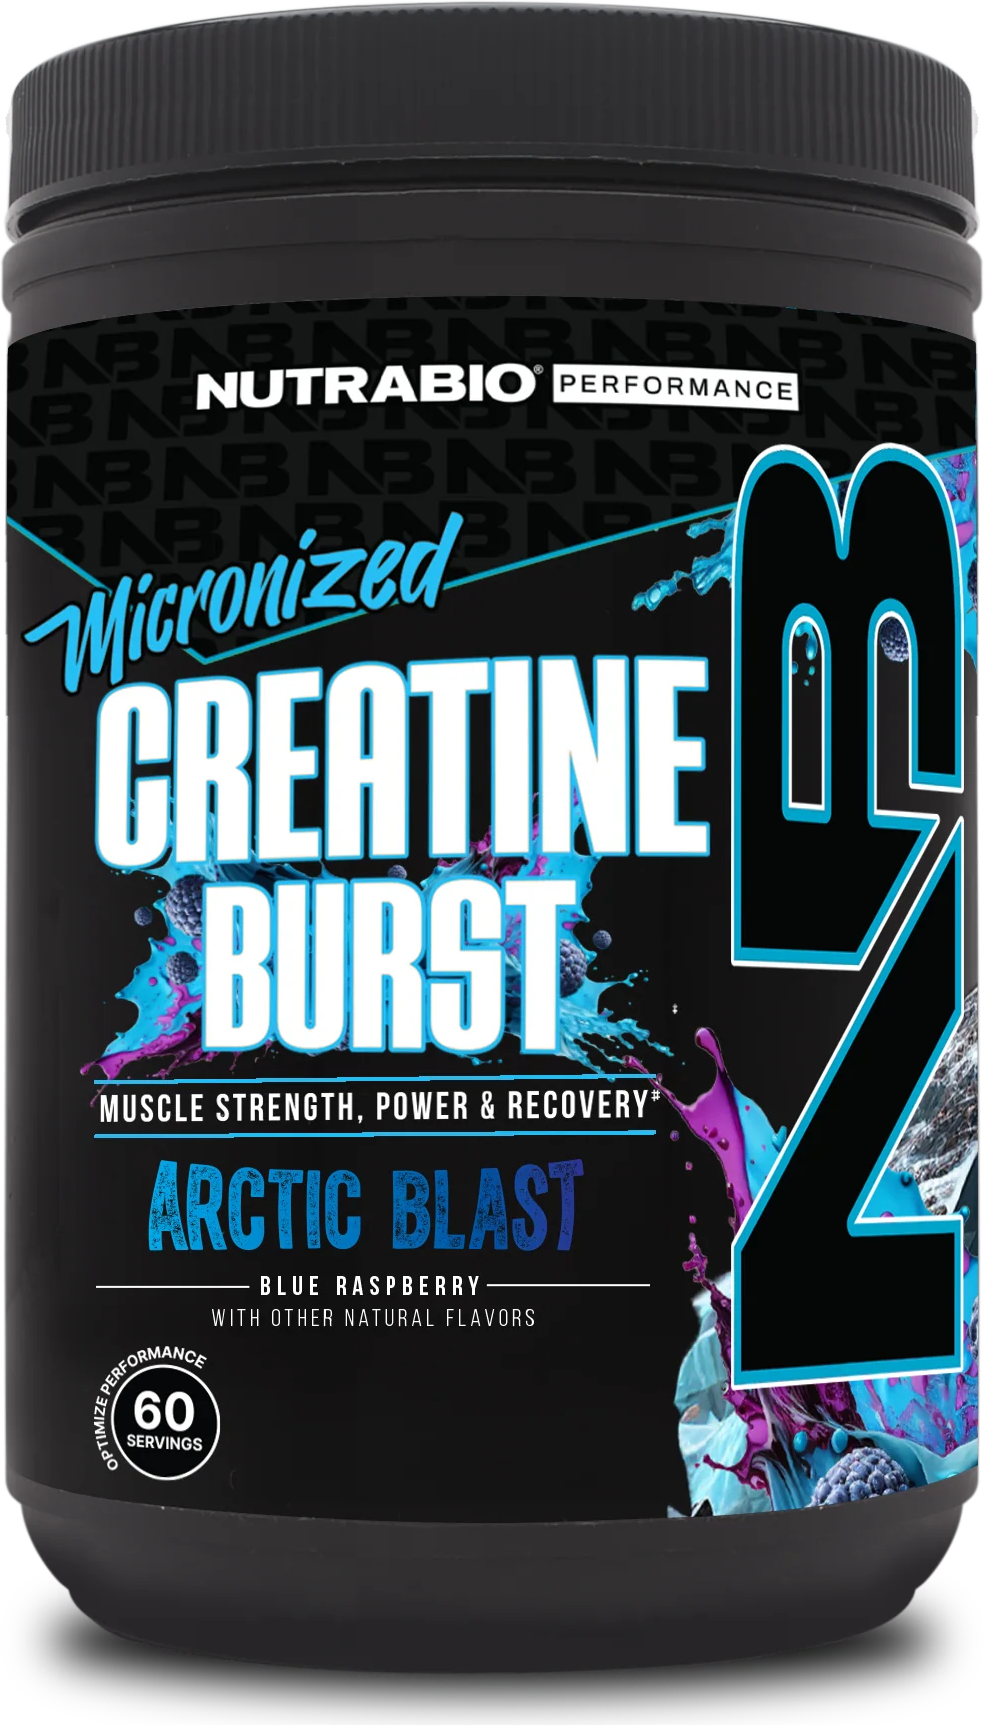 https://www.priceplow.com/static/images/products/nutrabio-creatine-burst.png